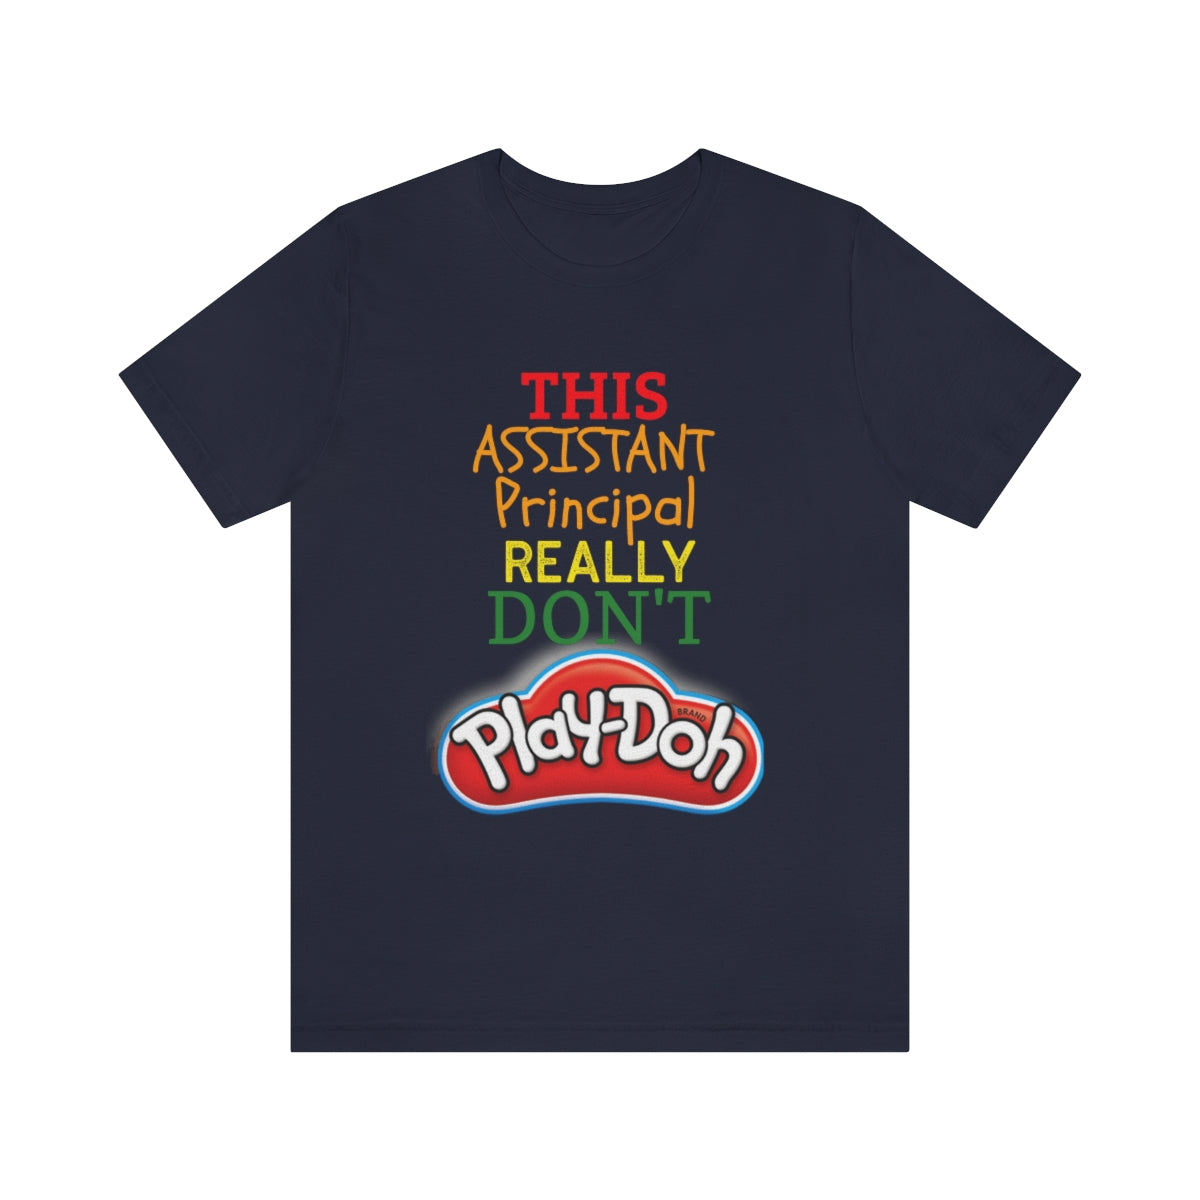 This Assistant Principal Really Don't Play-doh Tee